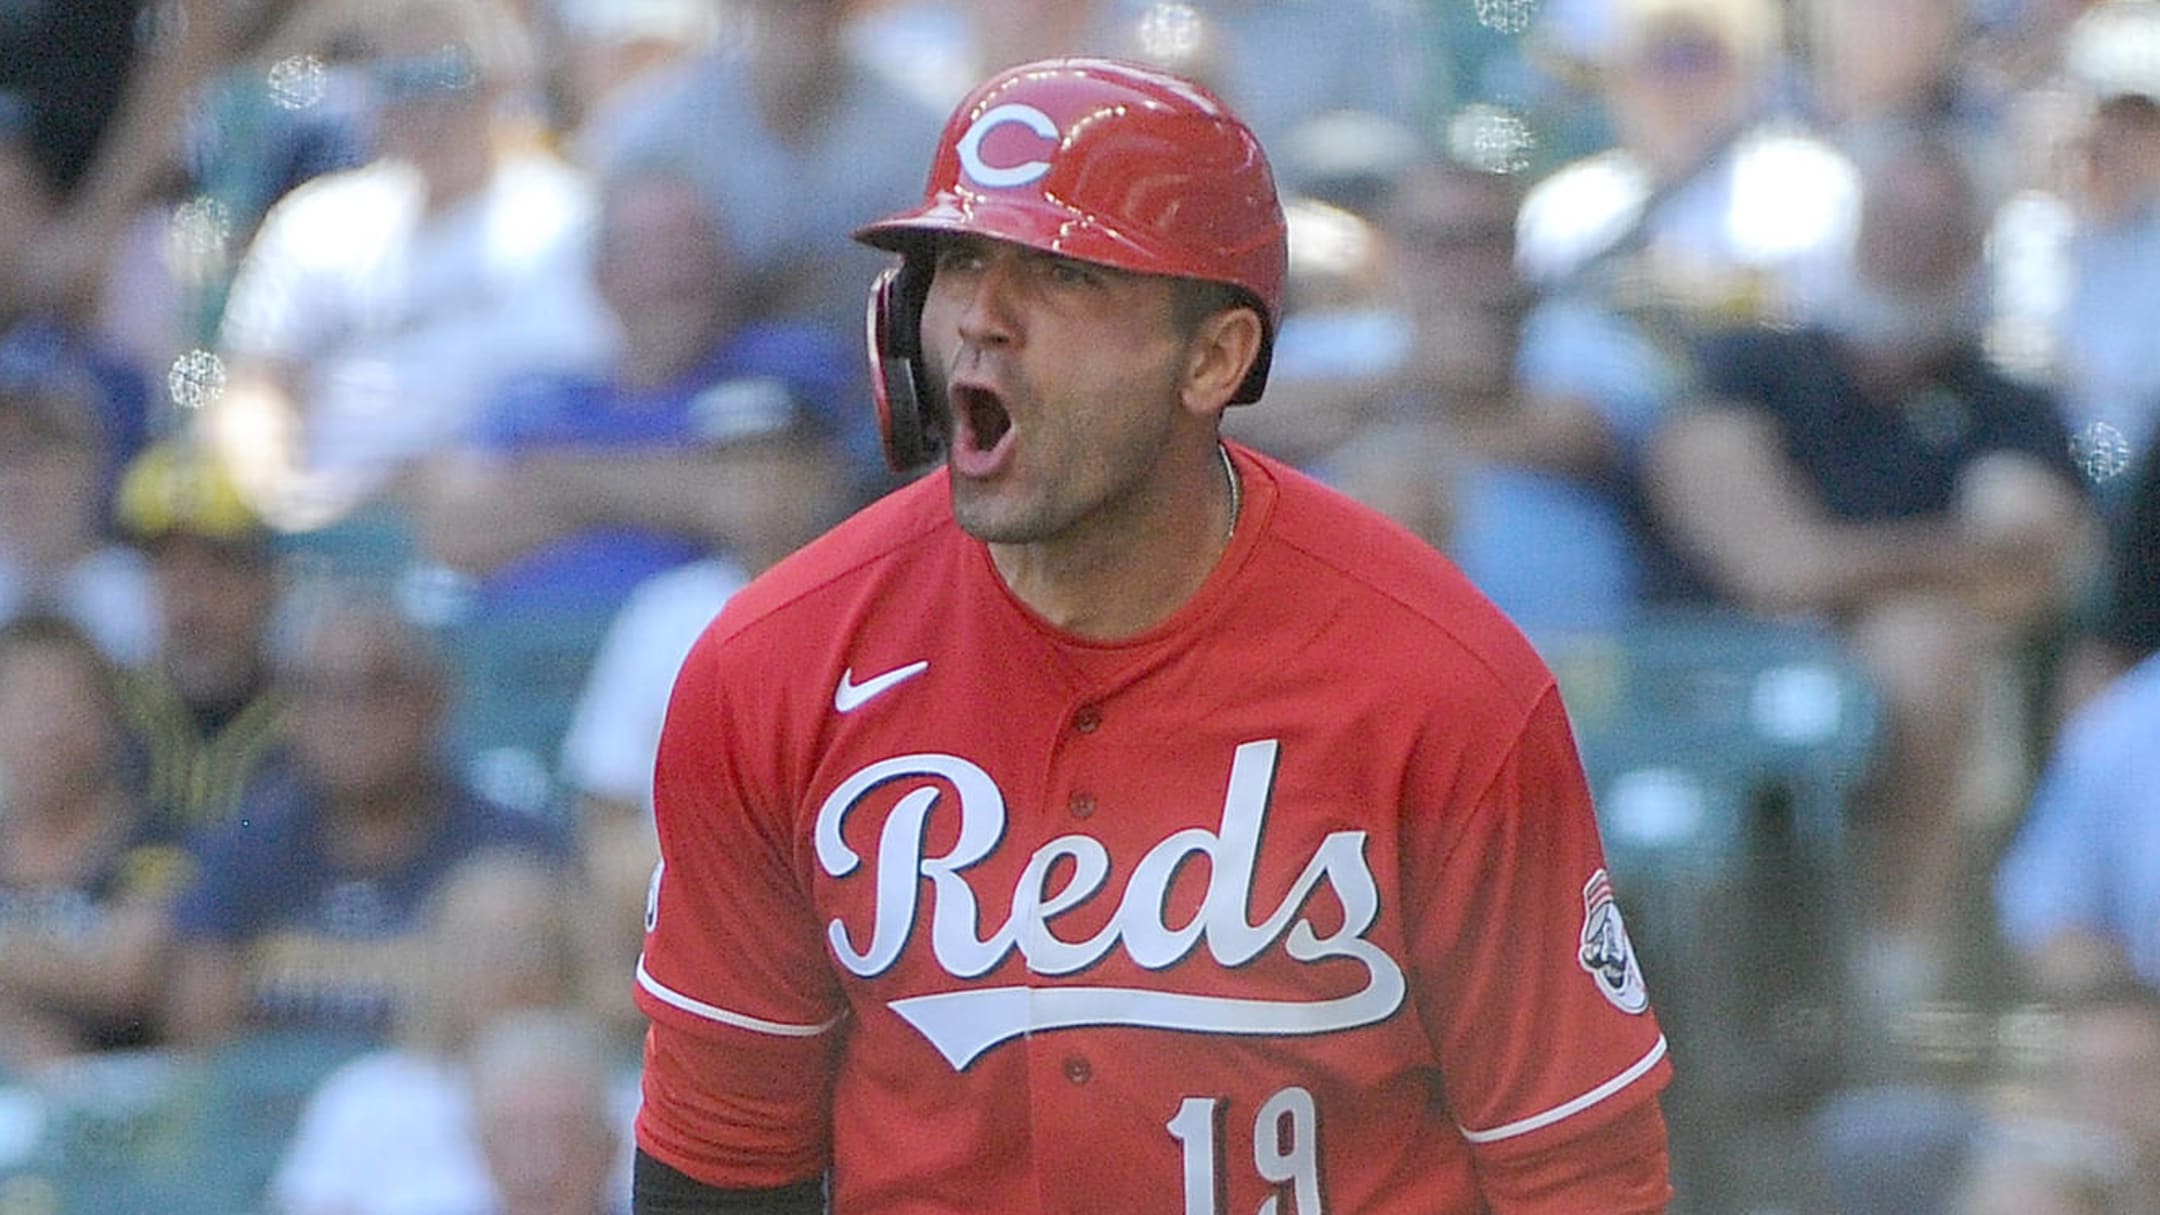 Reds: Why are some fans so angry about Joey Votto's impending return?